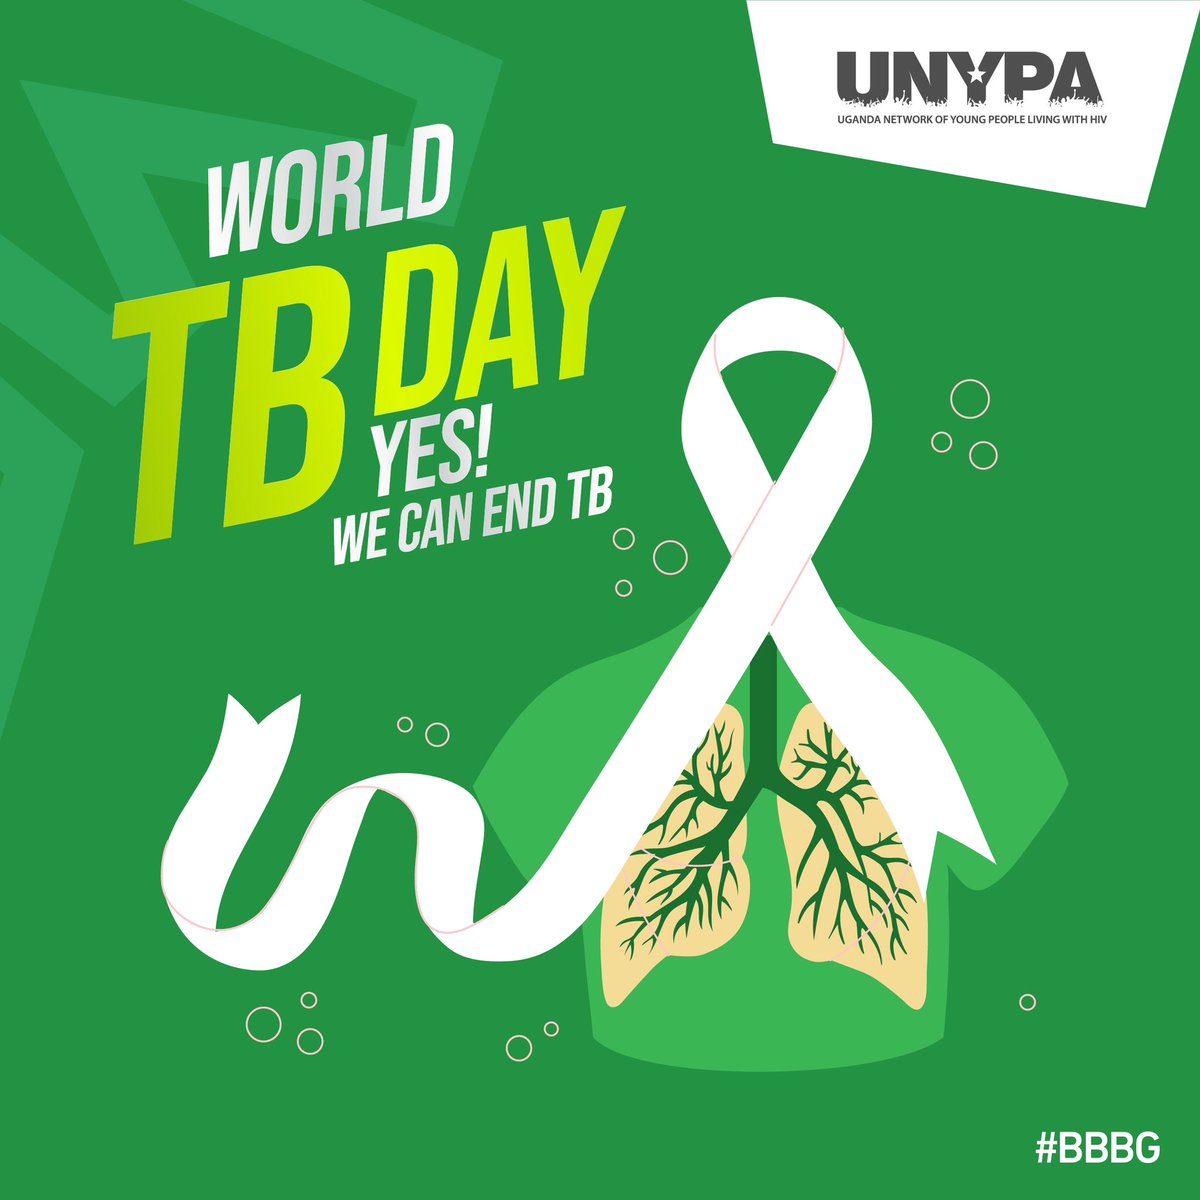 TB is still one of the world's deadliest diseases as it has been seen in recent years with a worrying increase in drug-resistant. Let us use this opportunity to renew our commitments, inspire and take action to end TB. #BBBG #TBIsCurable #WorldTBDay24